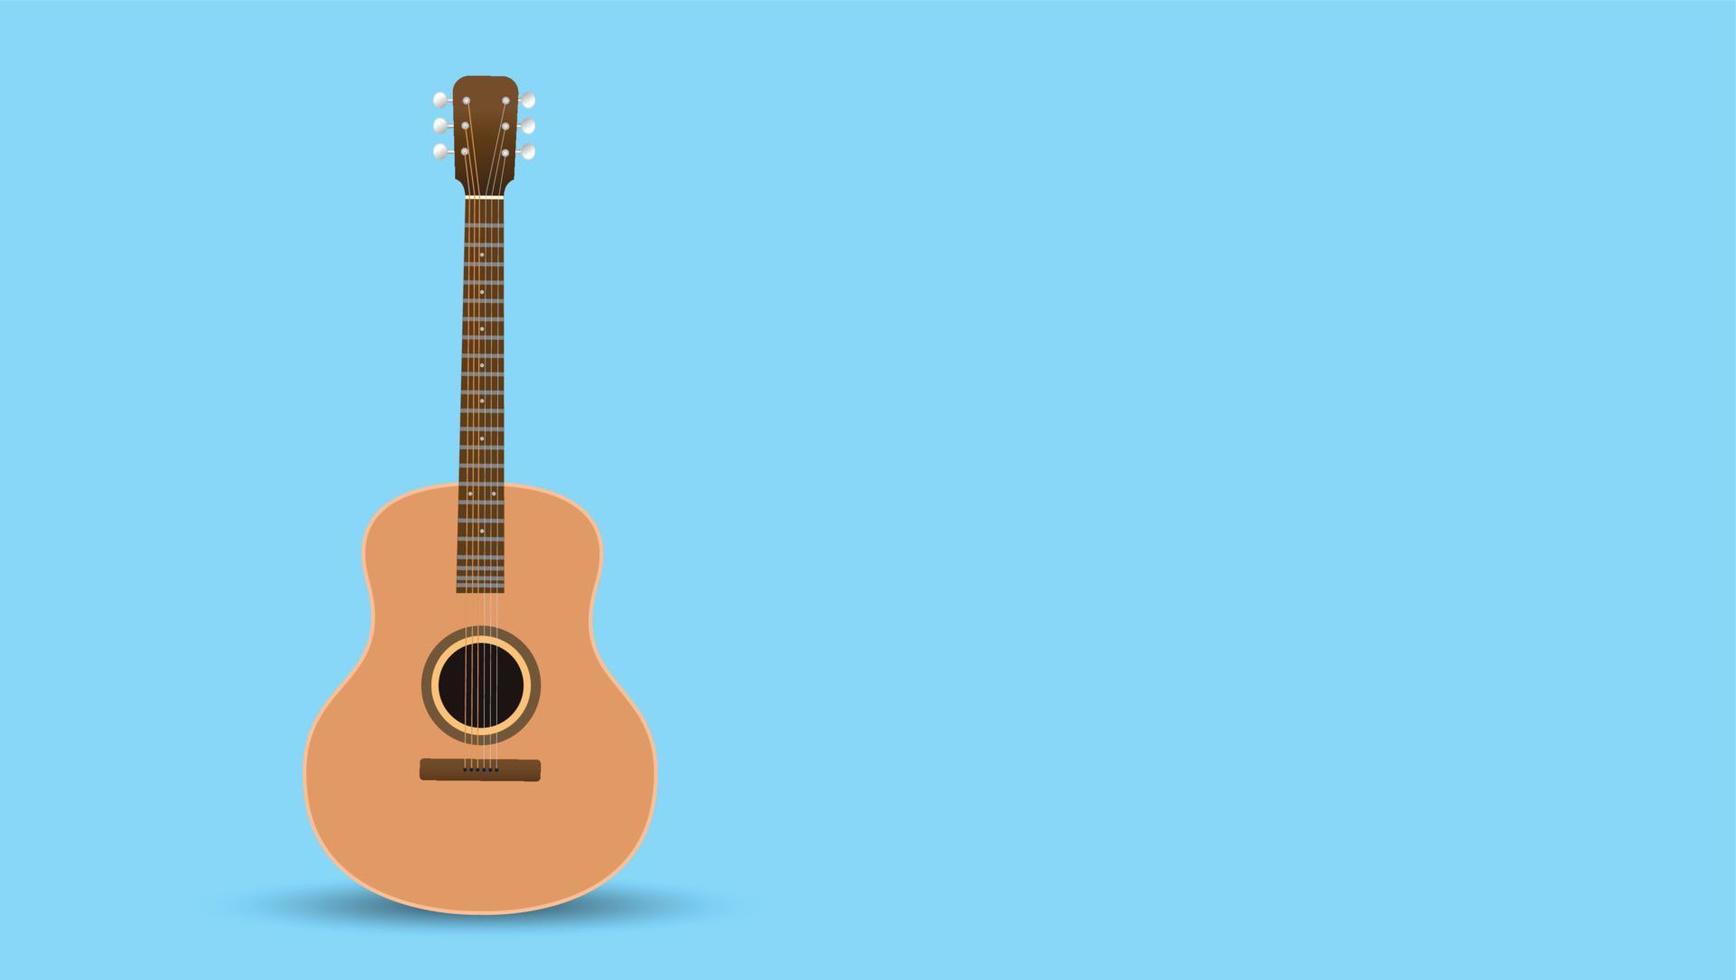 acoustic guitar, Isolated on background, Used to play music and notes, Vector illustration.